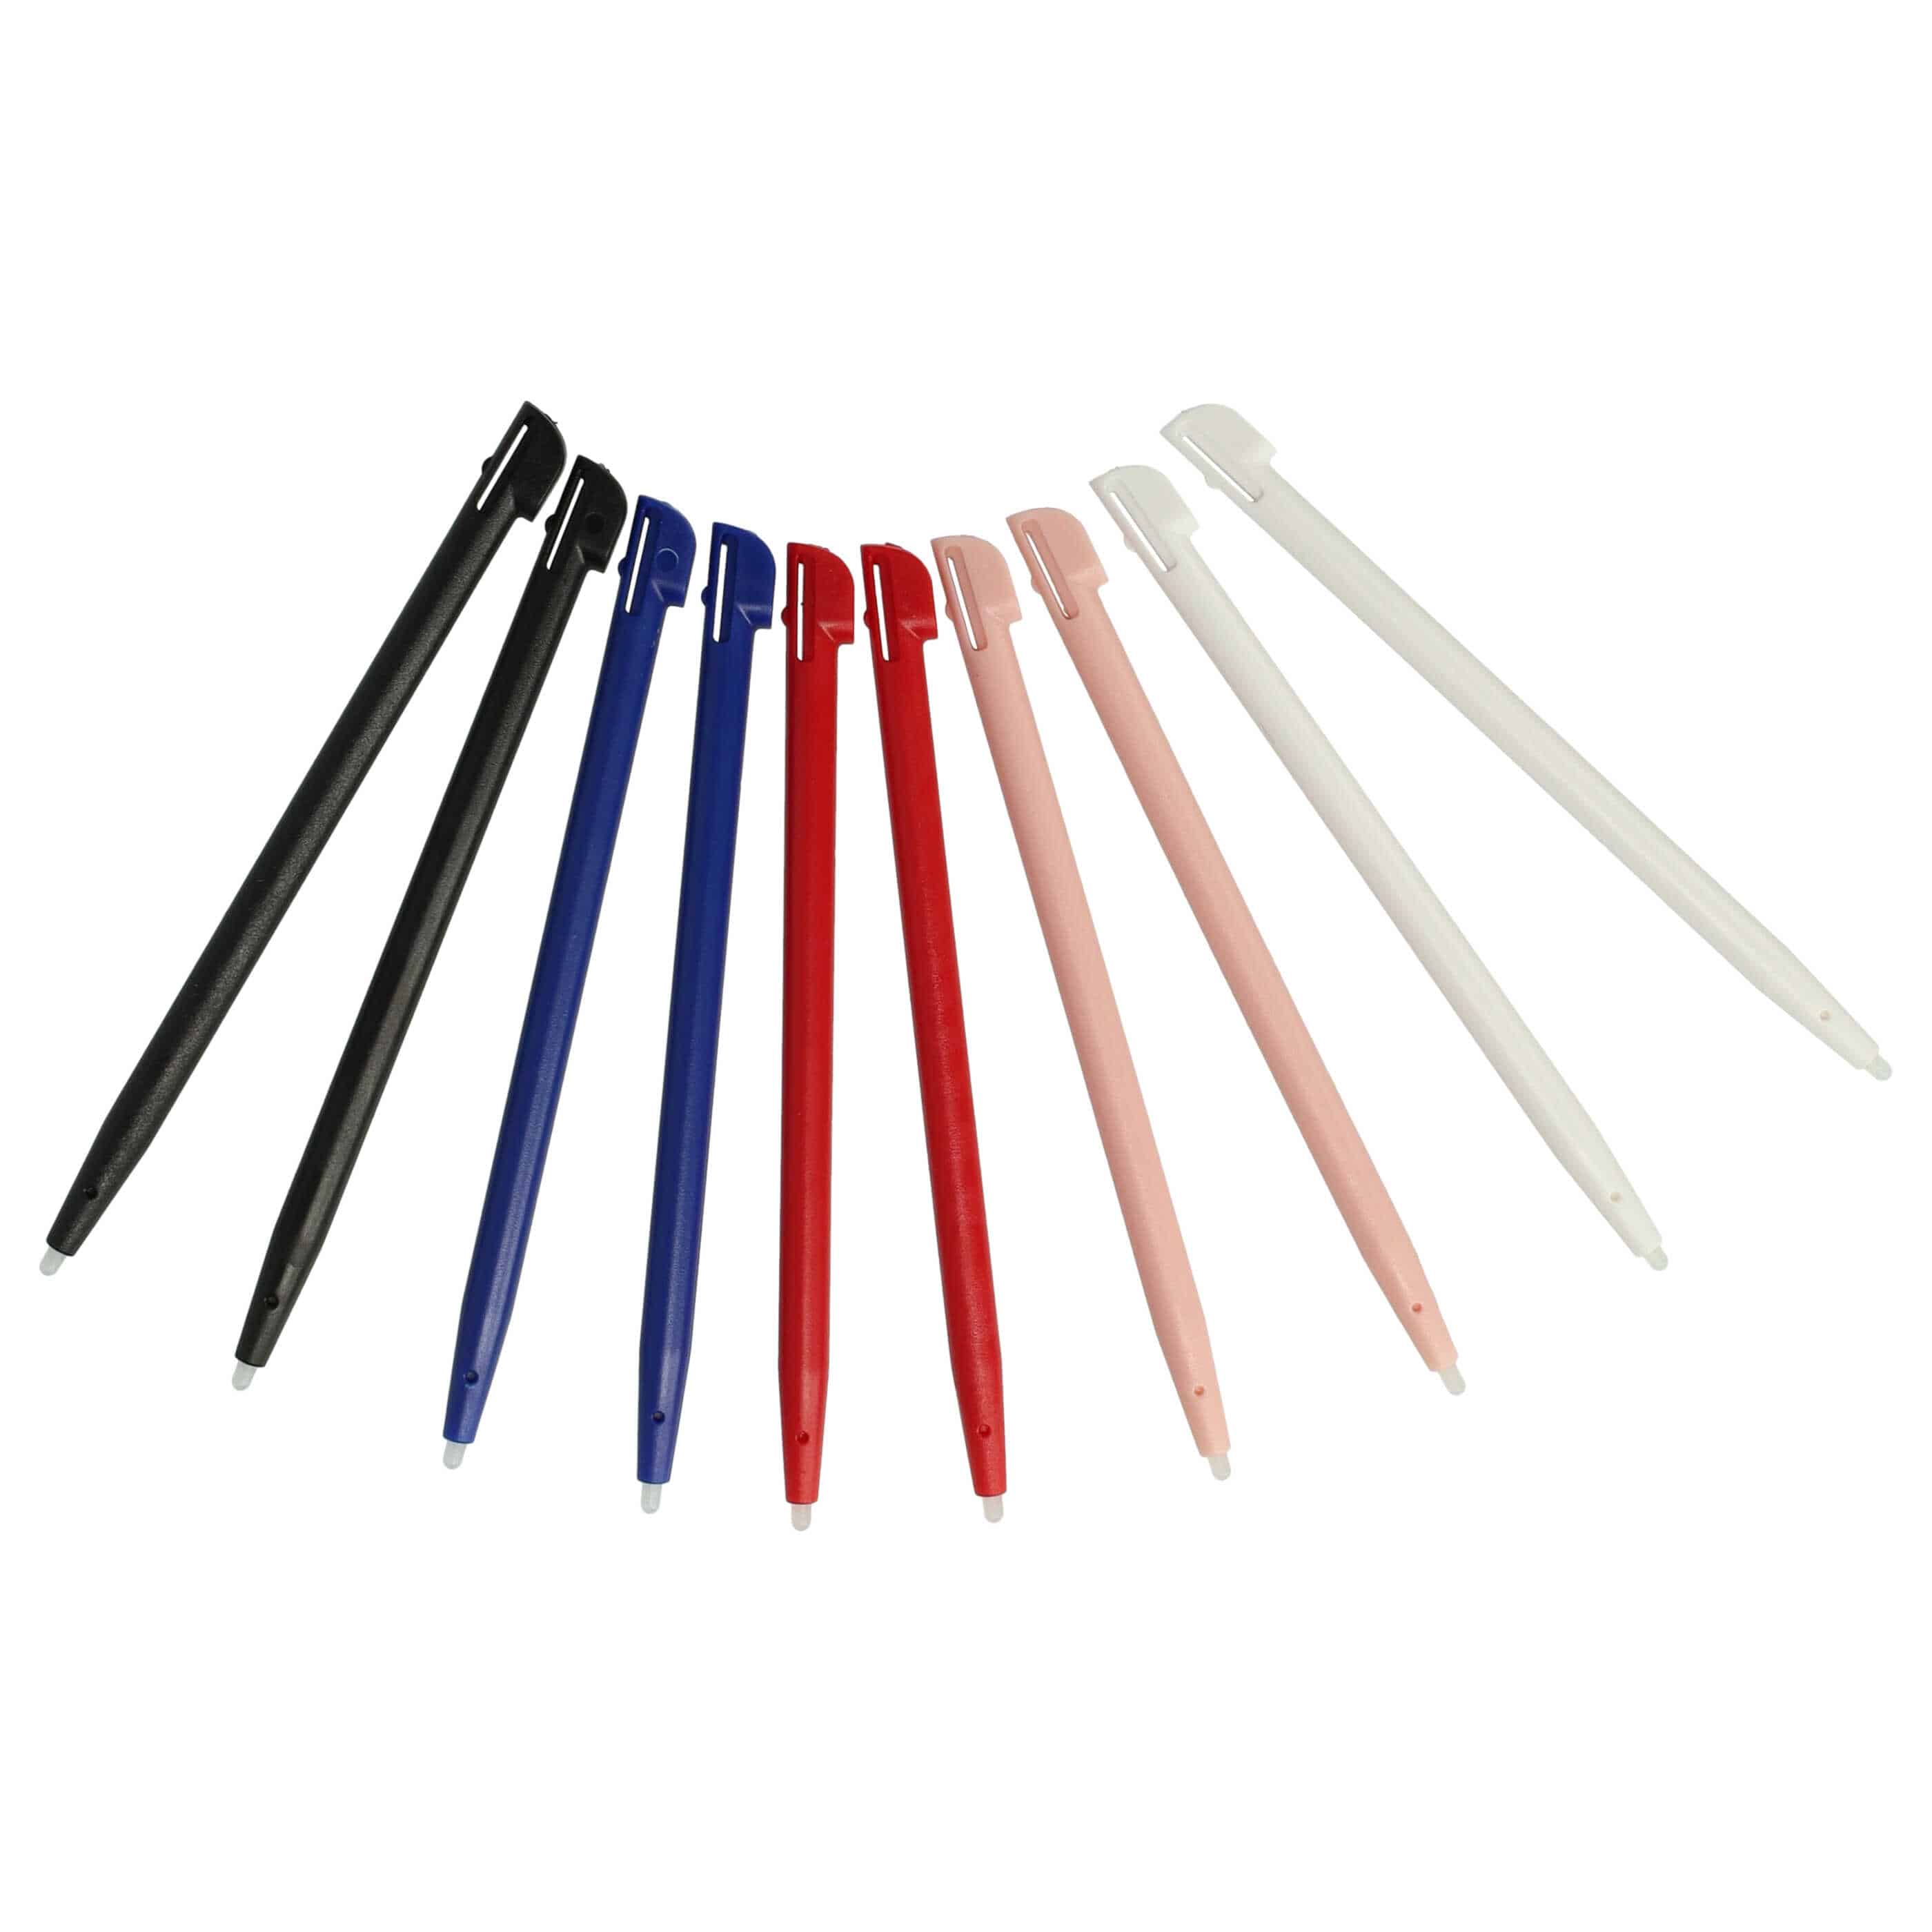 10x Touch Pens suitable for Nintendo 2DS Game Console - blue, pink, red, black, white